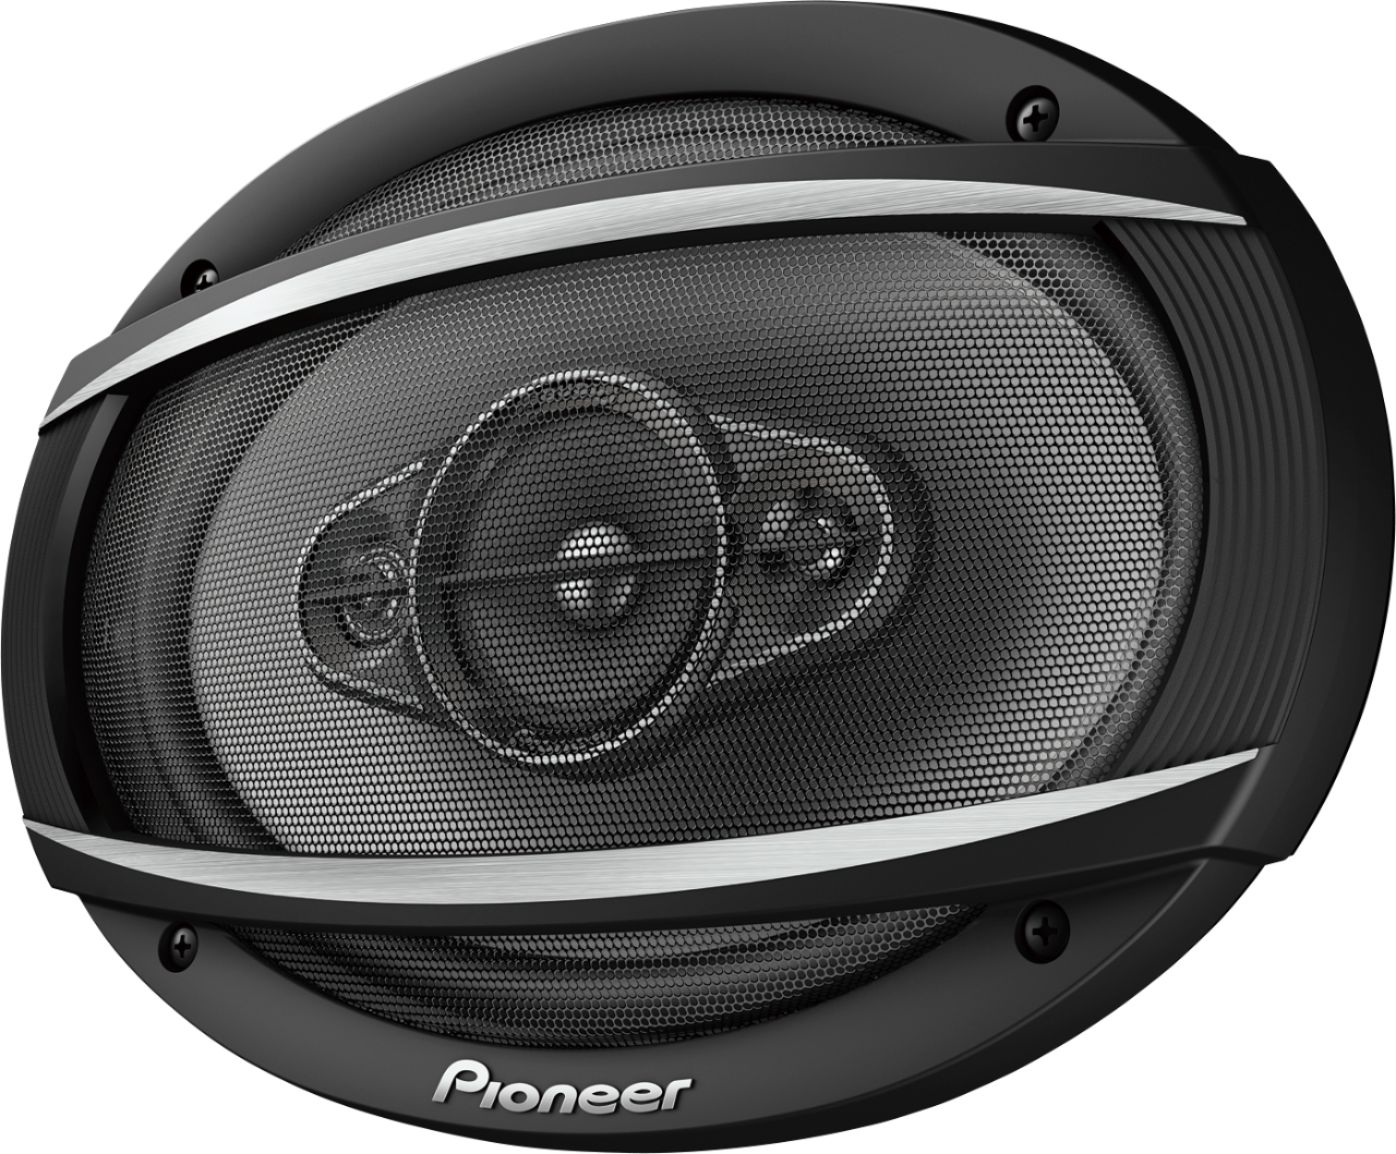 Angle View: Pioneer - 4"x 6" - 3-way , 210 W Max Power, IMPP™ cone, 11mm Tweeter and 1-5/8" Midrange - Coaxial Speakers (pair) - Black